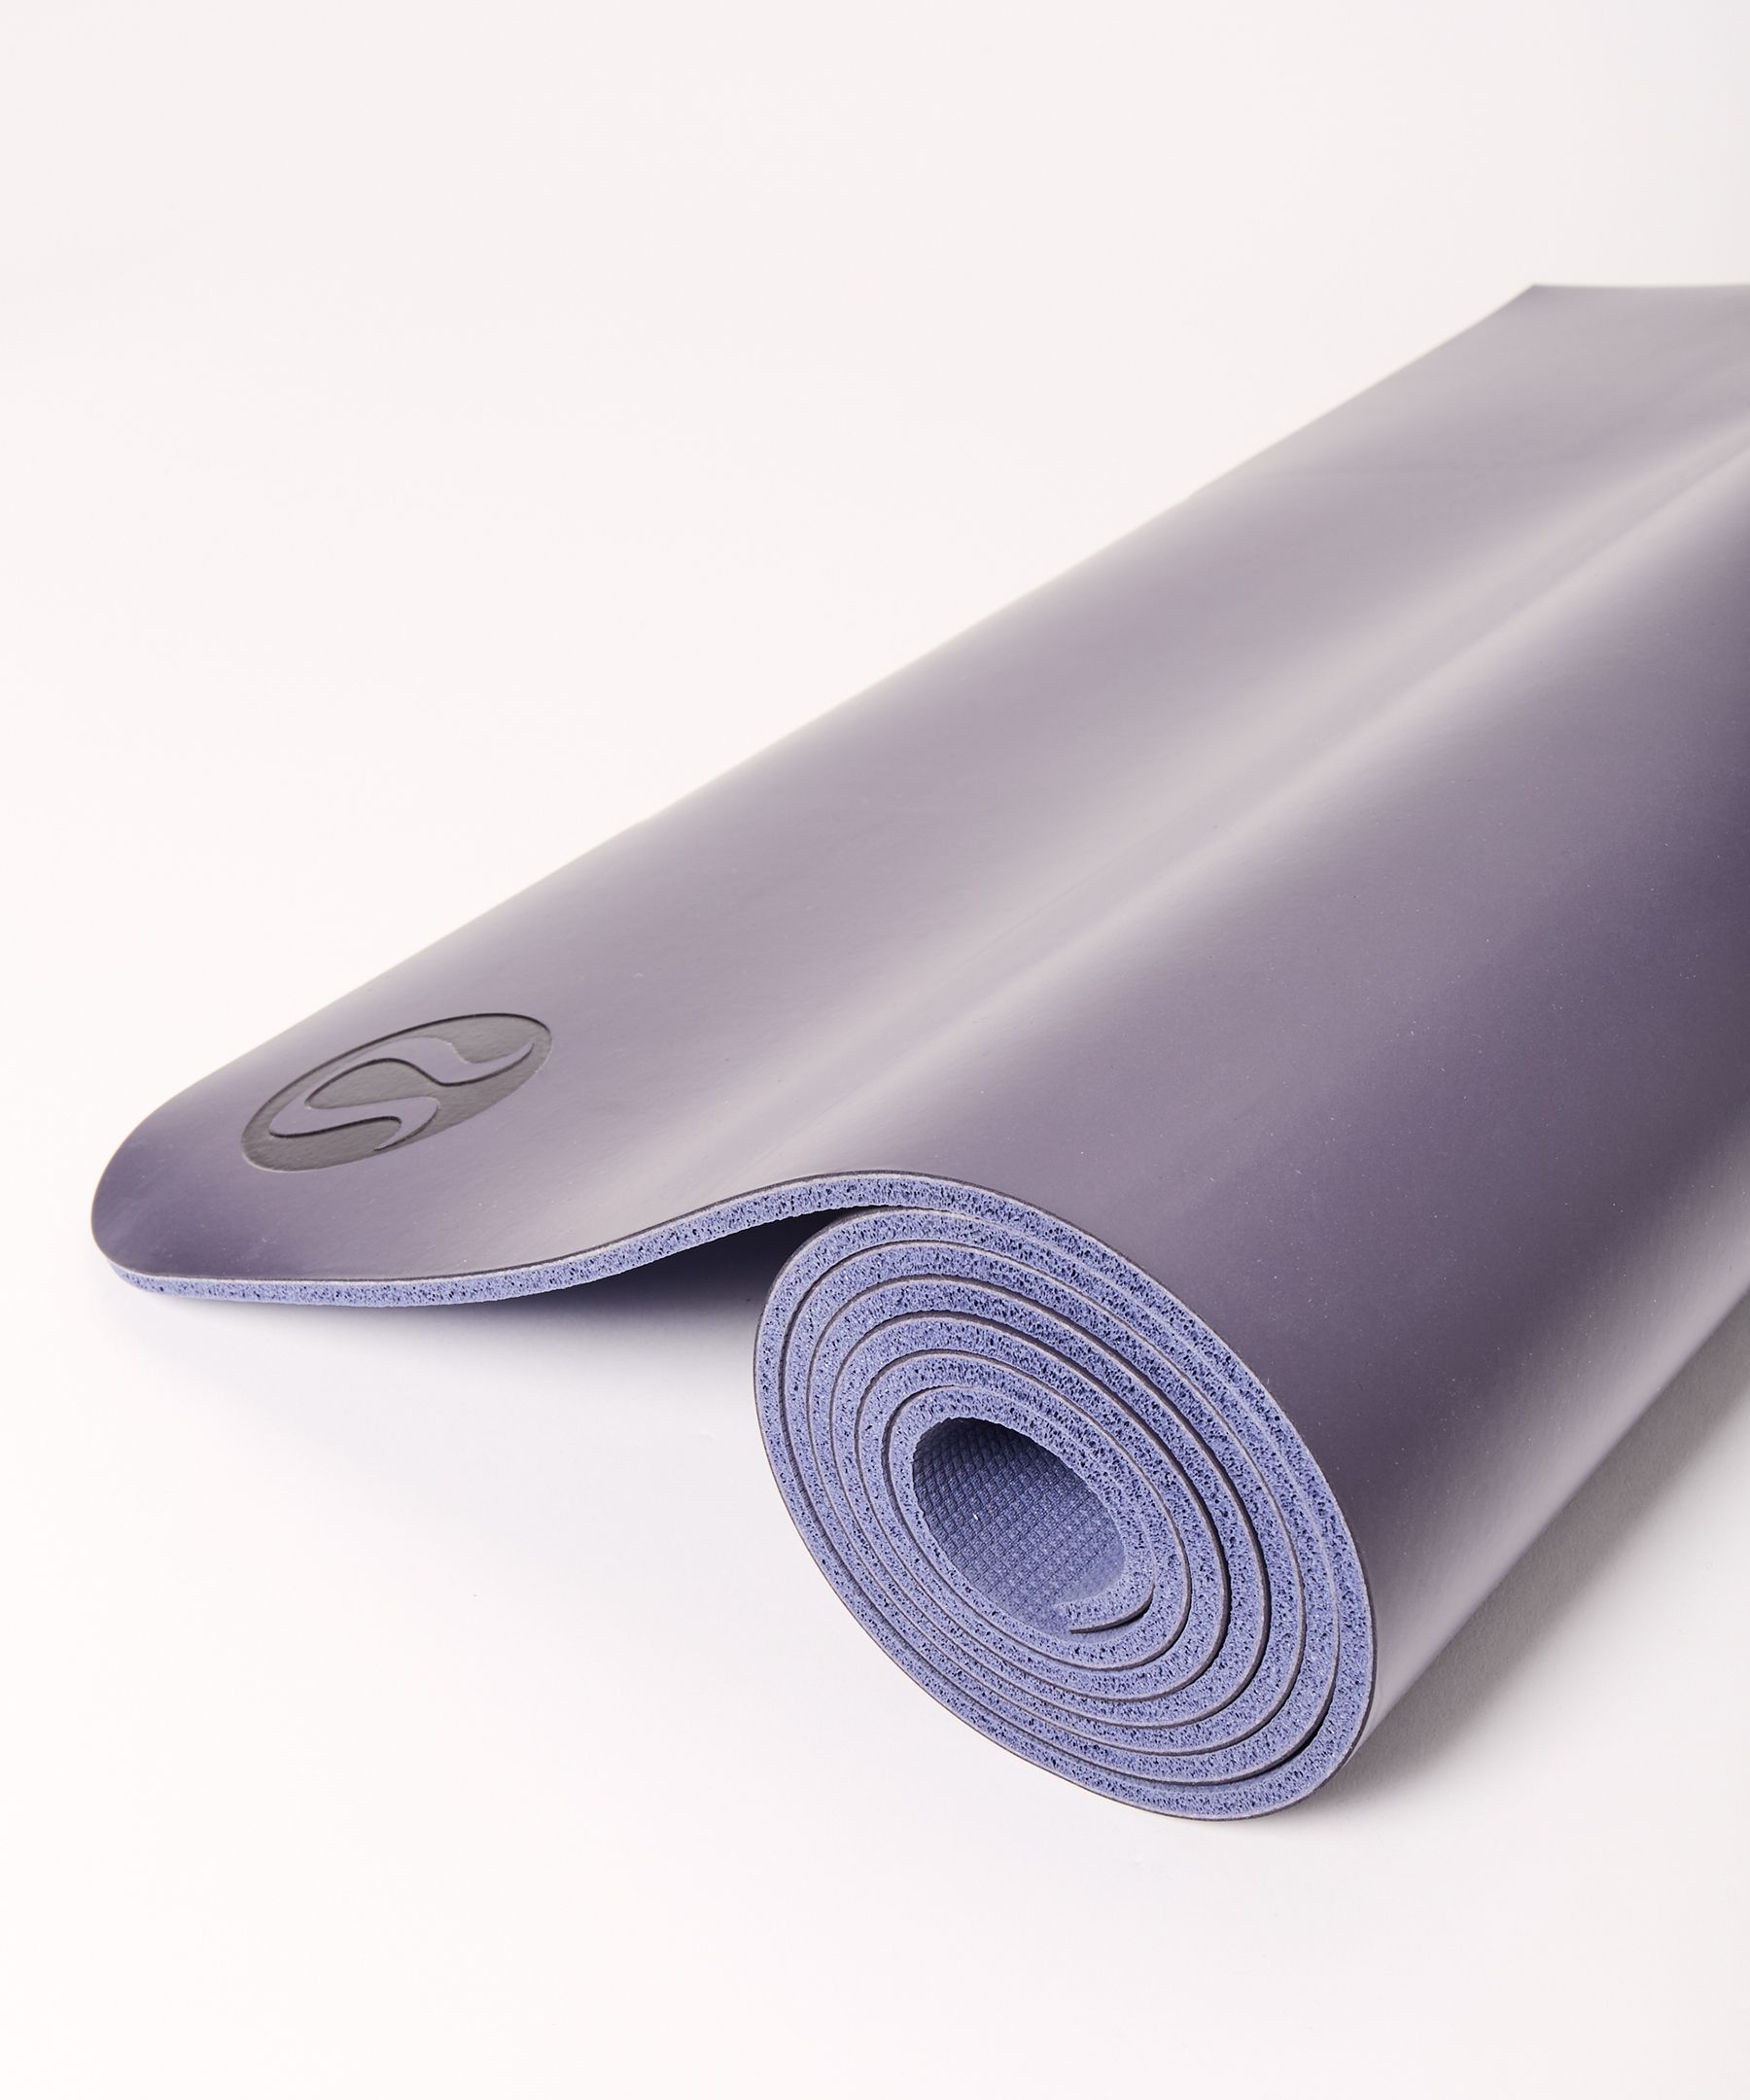 CEH Finds Toxic Chemical in Lululemon Yoga Mat - Center for Environmental  Health